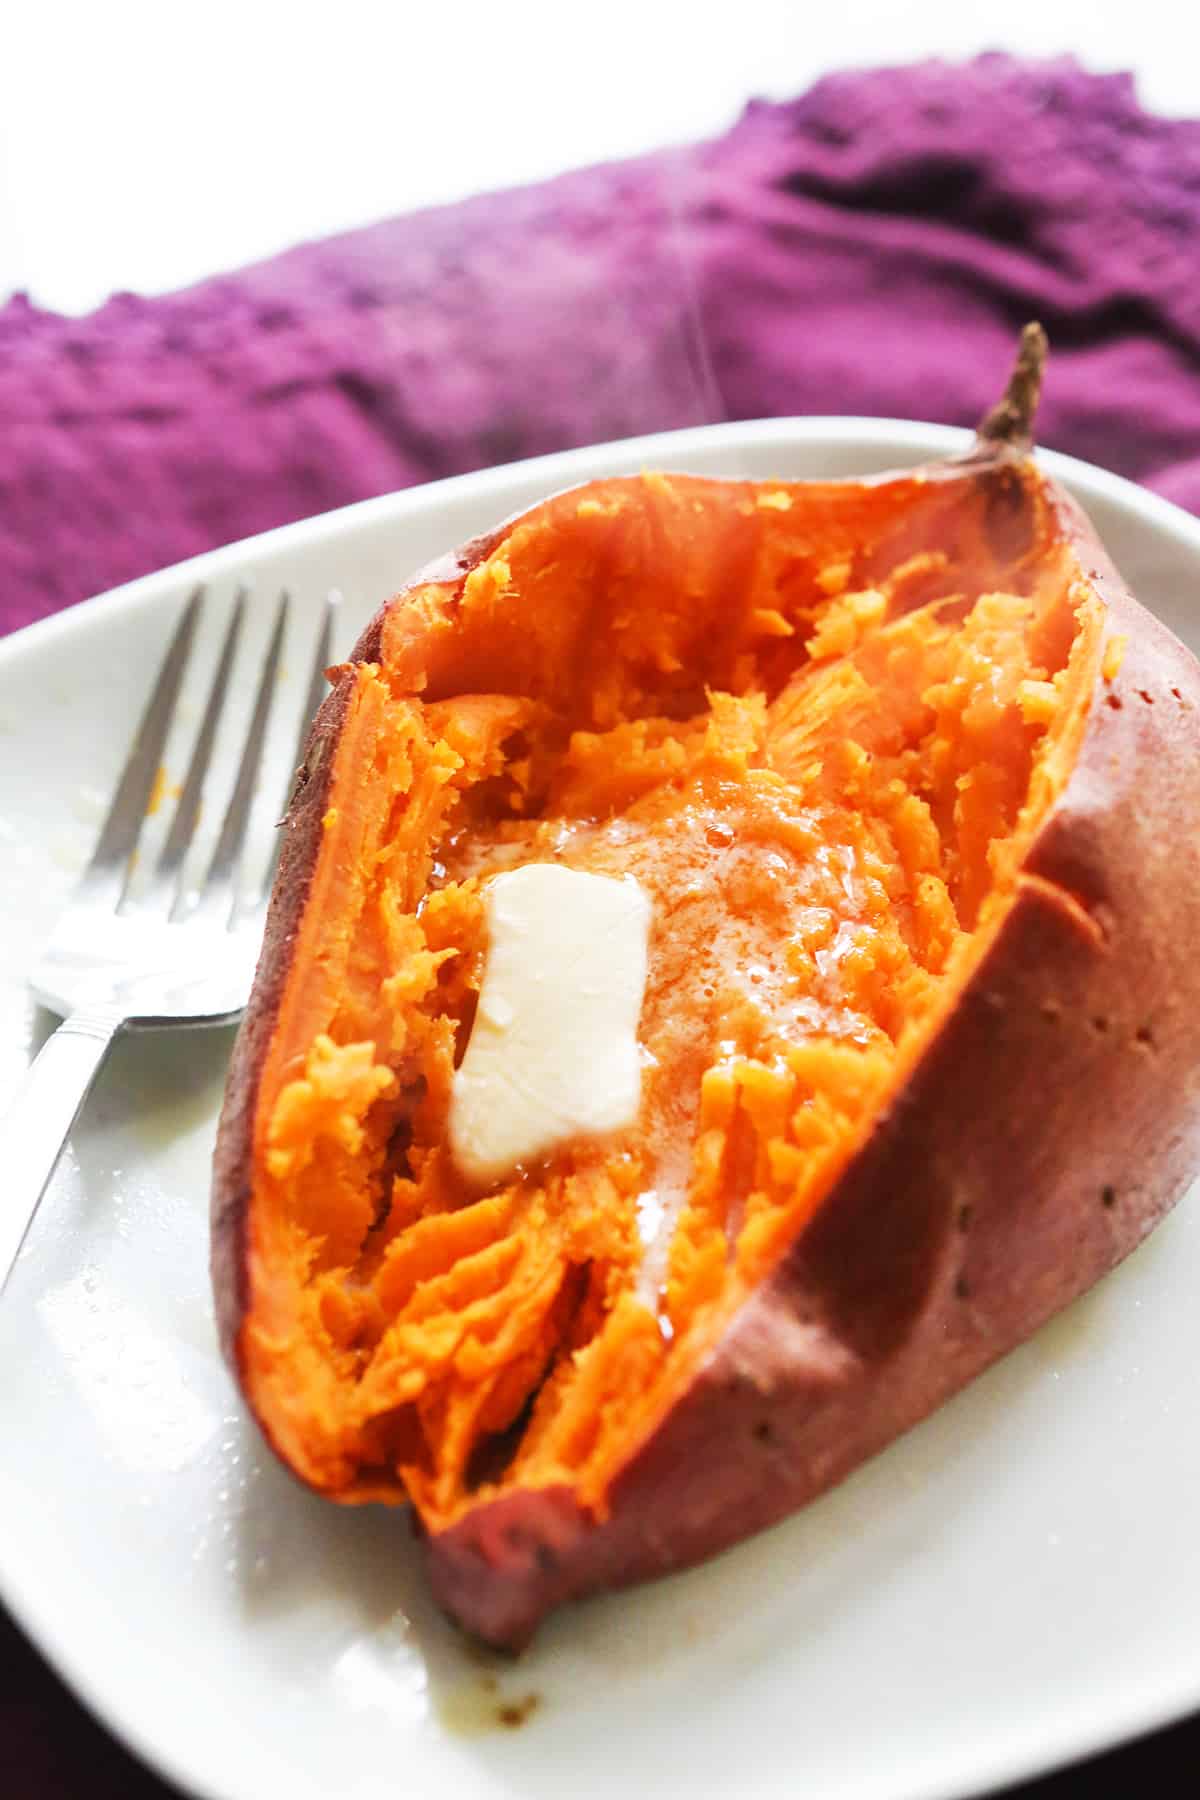 Baked sweet potato cut in half and a pat of butter melting into it. 